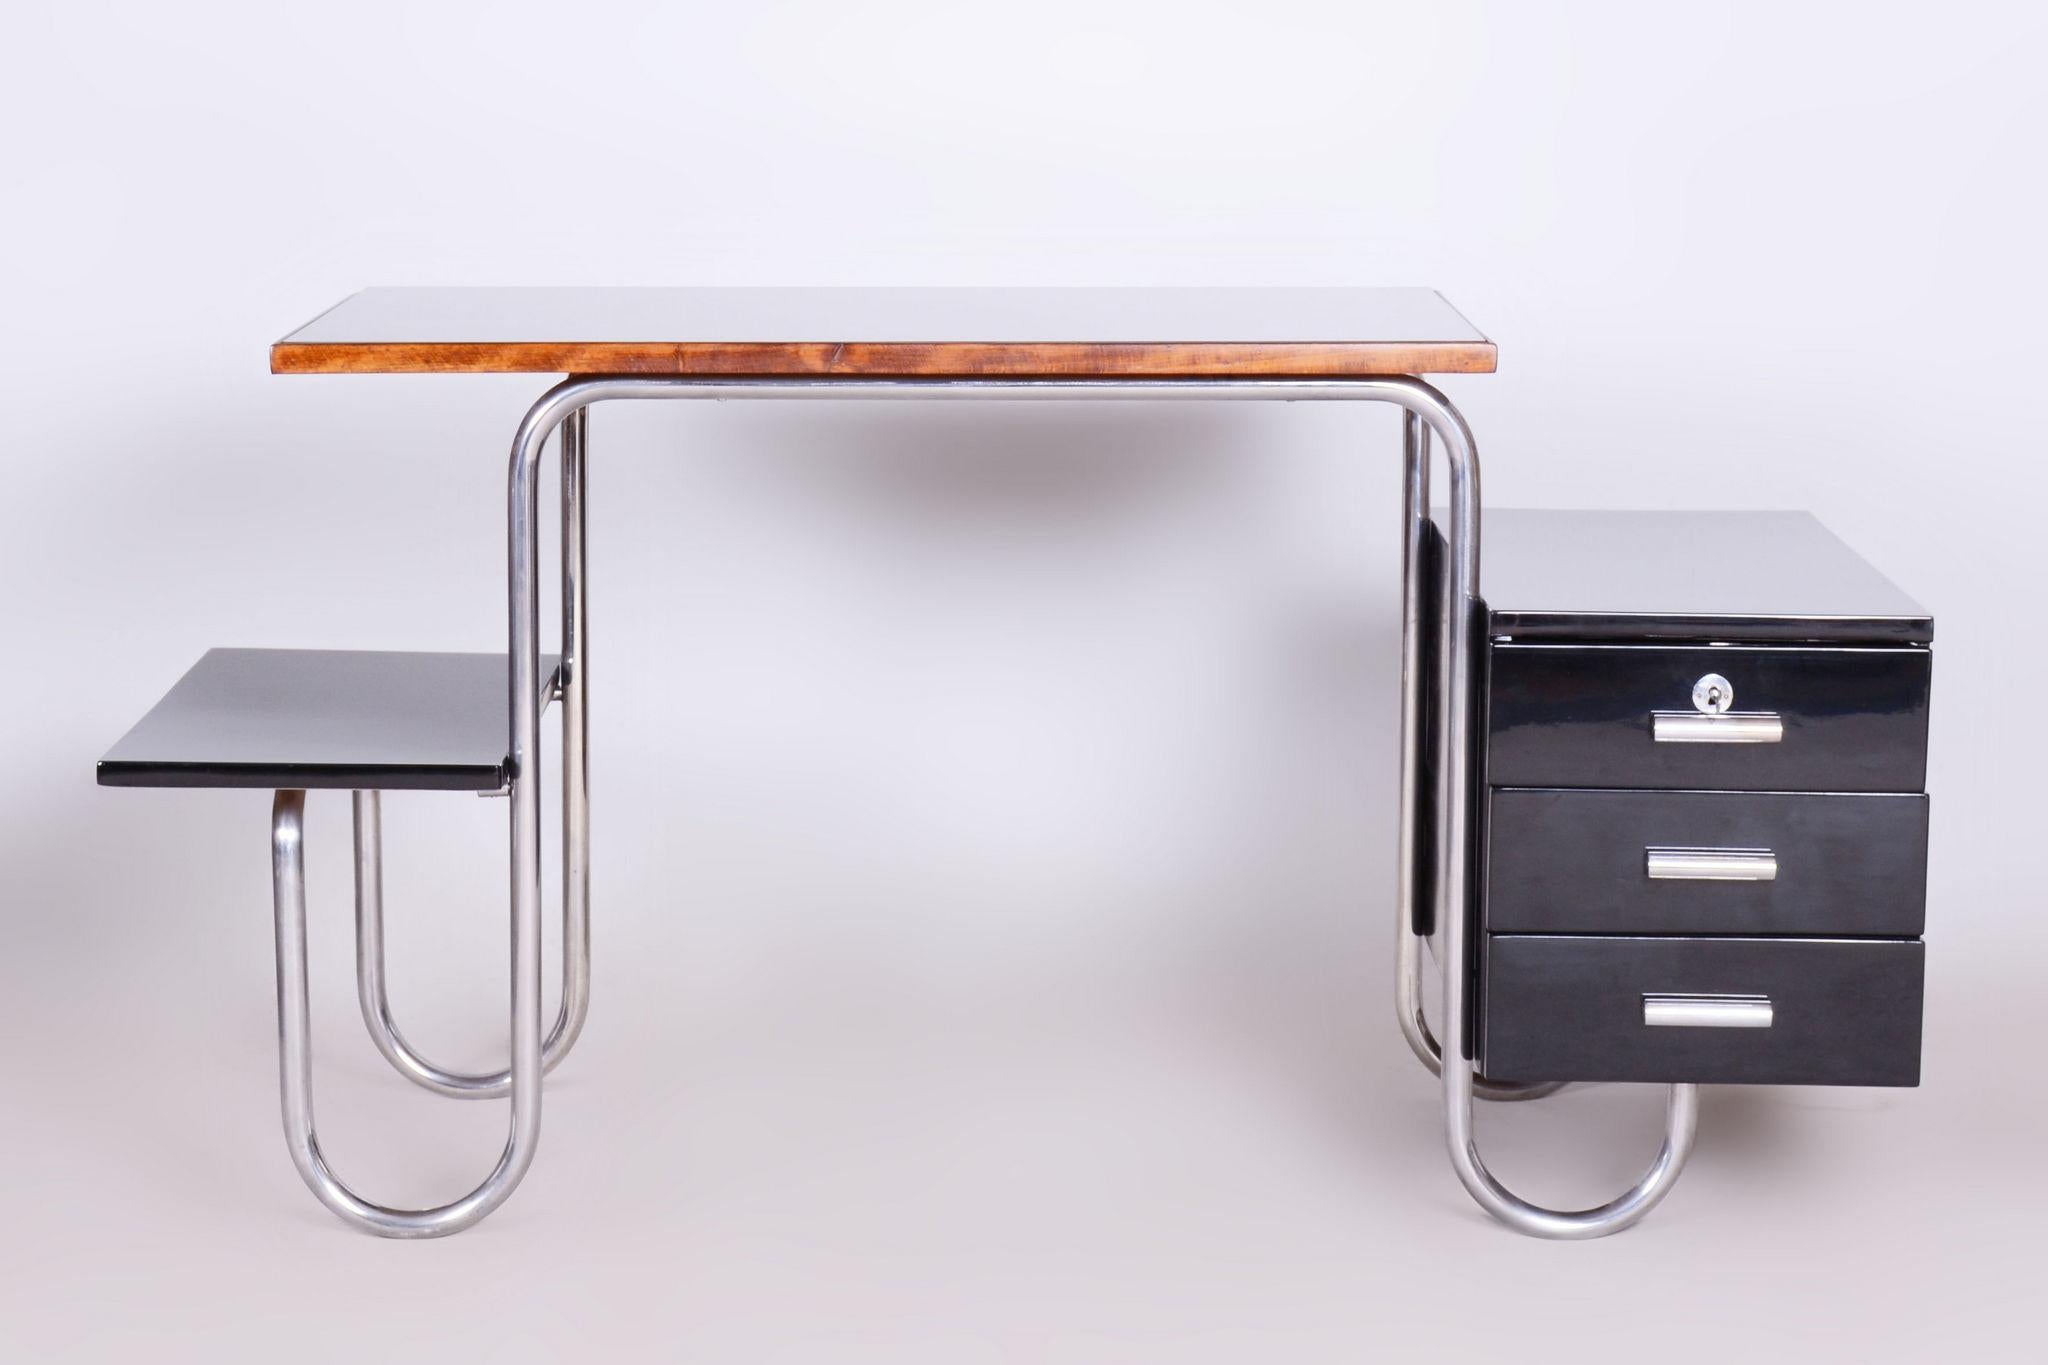 Restored Bauhaus Writing Desk
1930-1939
Origin: Czech

Dimensions of the table:
Height: 74 cm (29.1 in)
Width: 145 cm (57.1 in)
Depth: 72 cm (28.3 in)

Leg space:
Height: 69 cm (27.2 in)
Width: 72.5 cm (28.5 in)

Professionally cleaned chrome